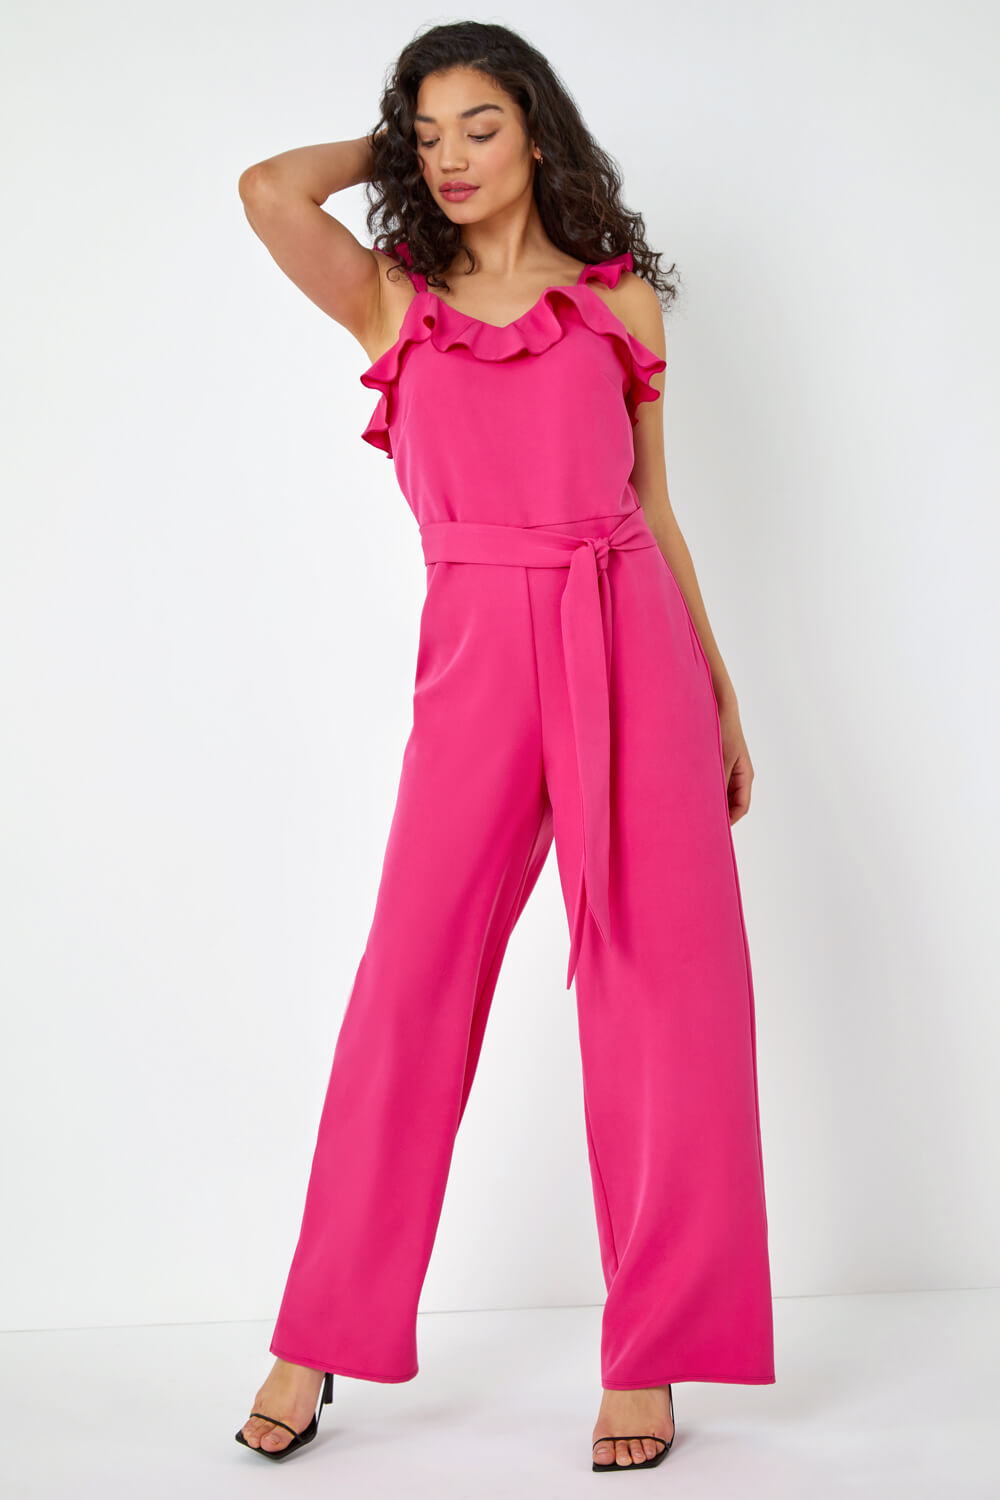 PINK Frill Detail Wide Leg Jumpsuit, Image 4 of 5